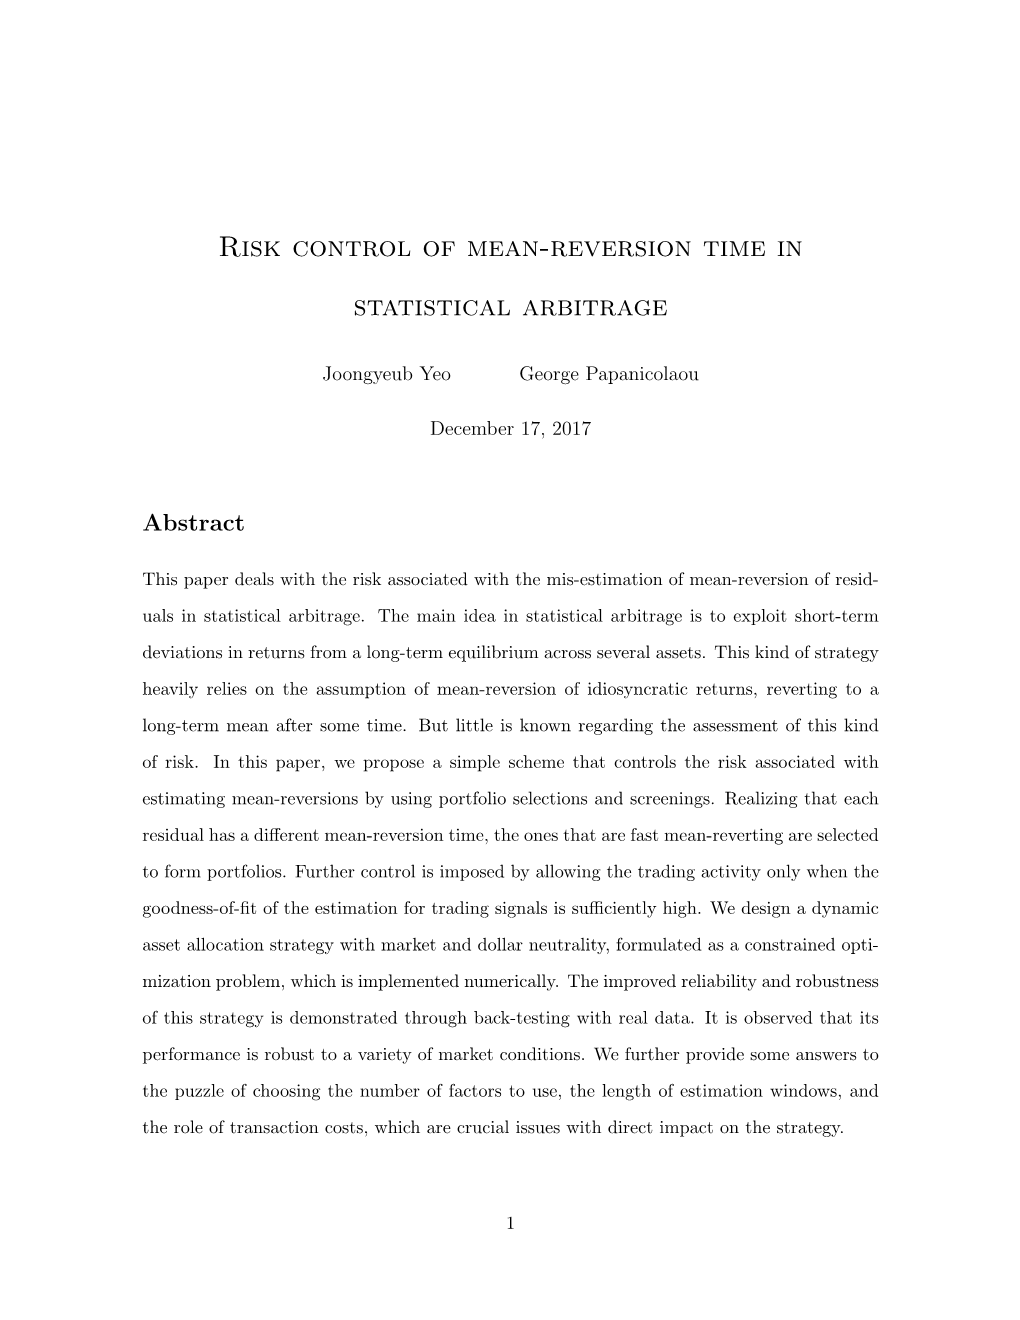 Risk Control of Mean-Reversion Time in Statistical Arbitrage